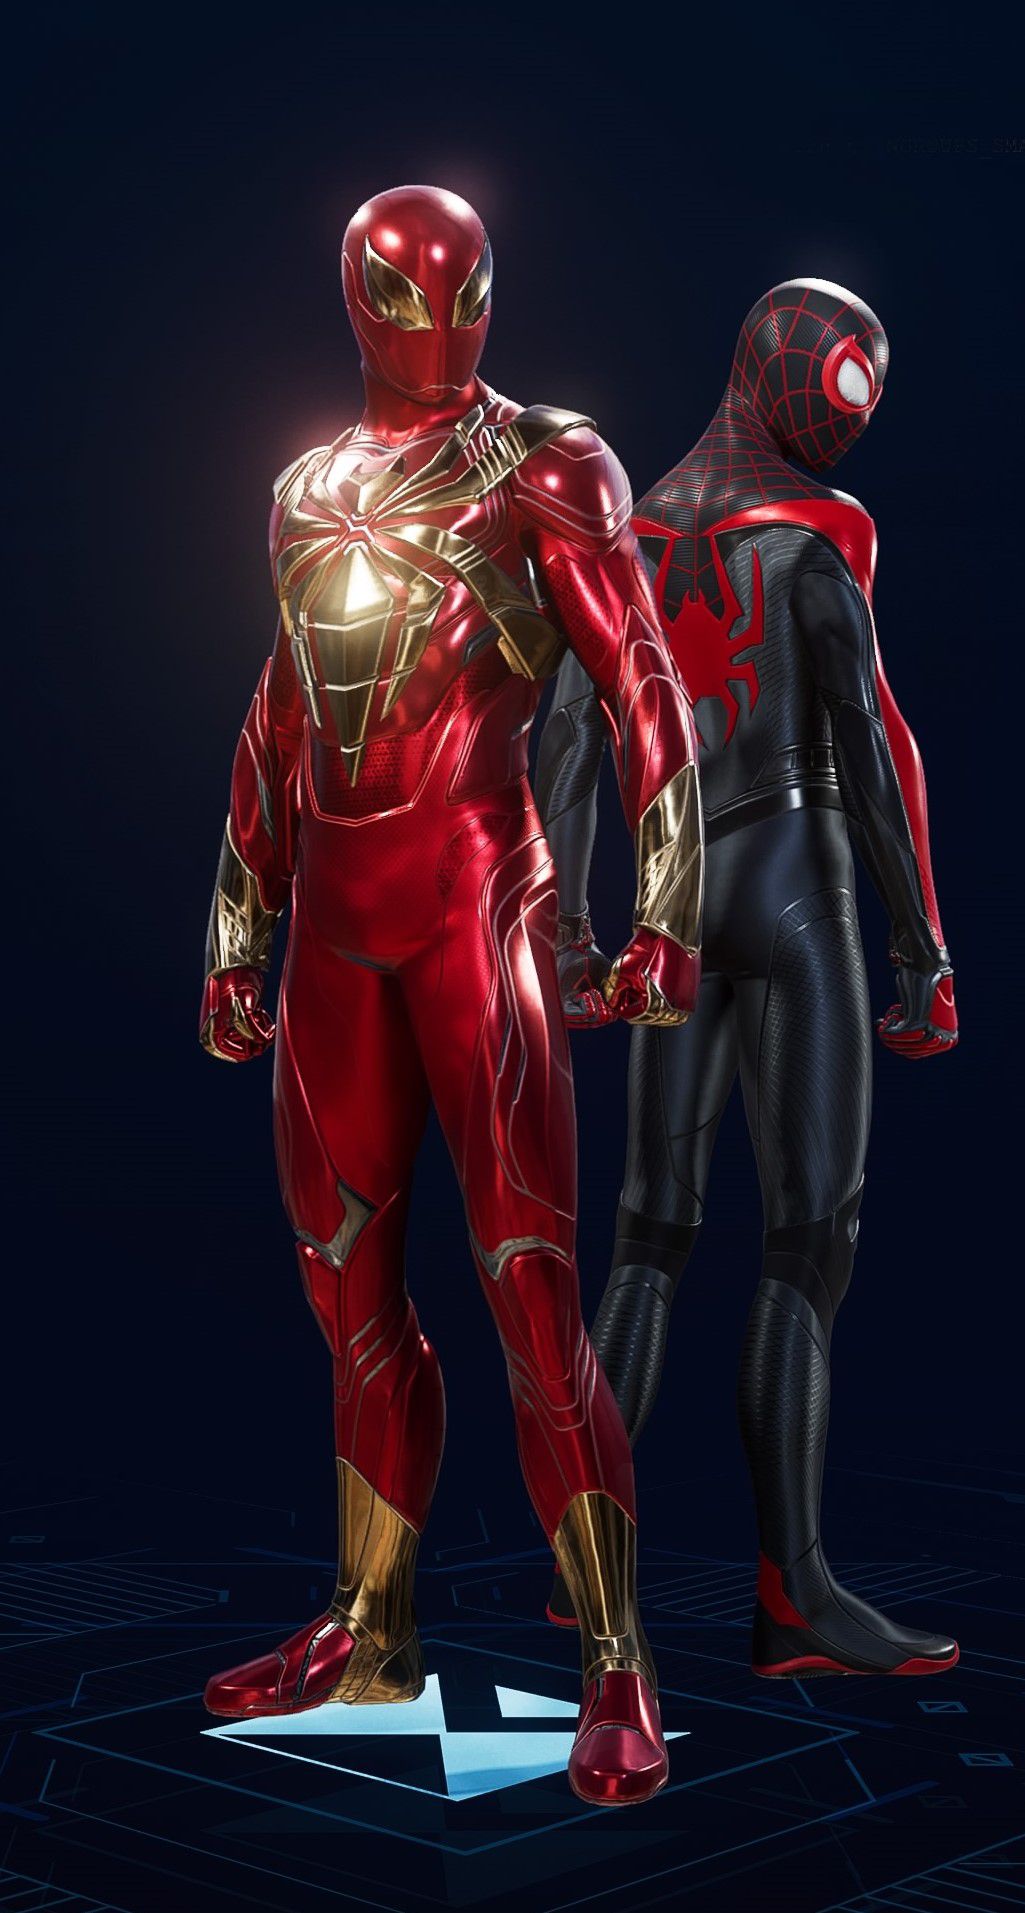 Peter Parker stands in his Iron Spider-Armor Suit in the suit selection screen of Spider-Man 2.